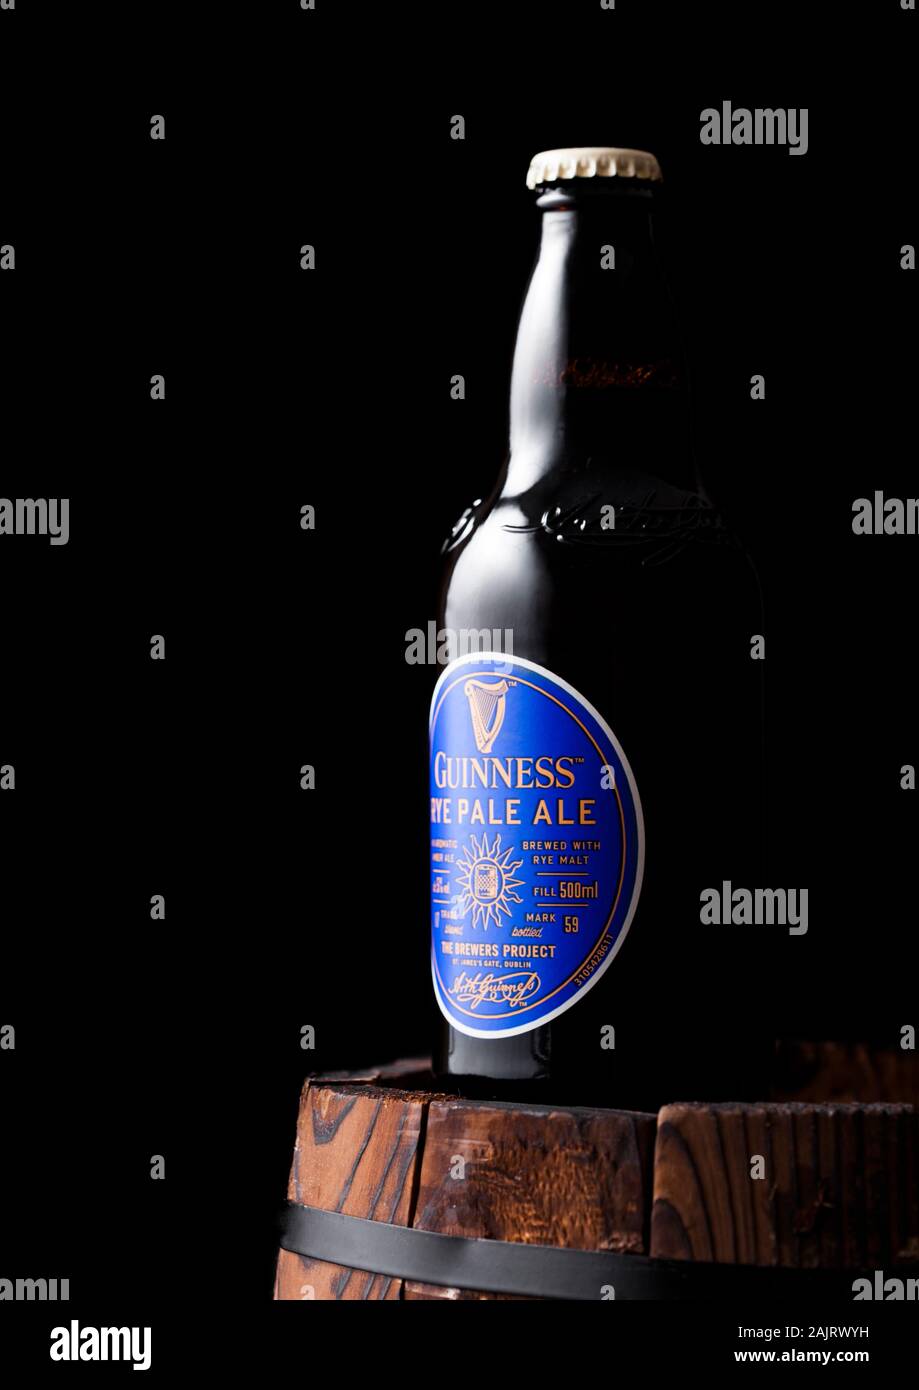 LONDON, UK - APRIL 27, 2018: Bottle of Guinness rye pale ale beer on top of old wooden barrel. Guinness beer has been produced since 1759 in Dublin, I Stock Photo